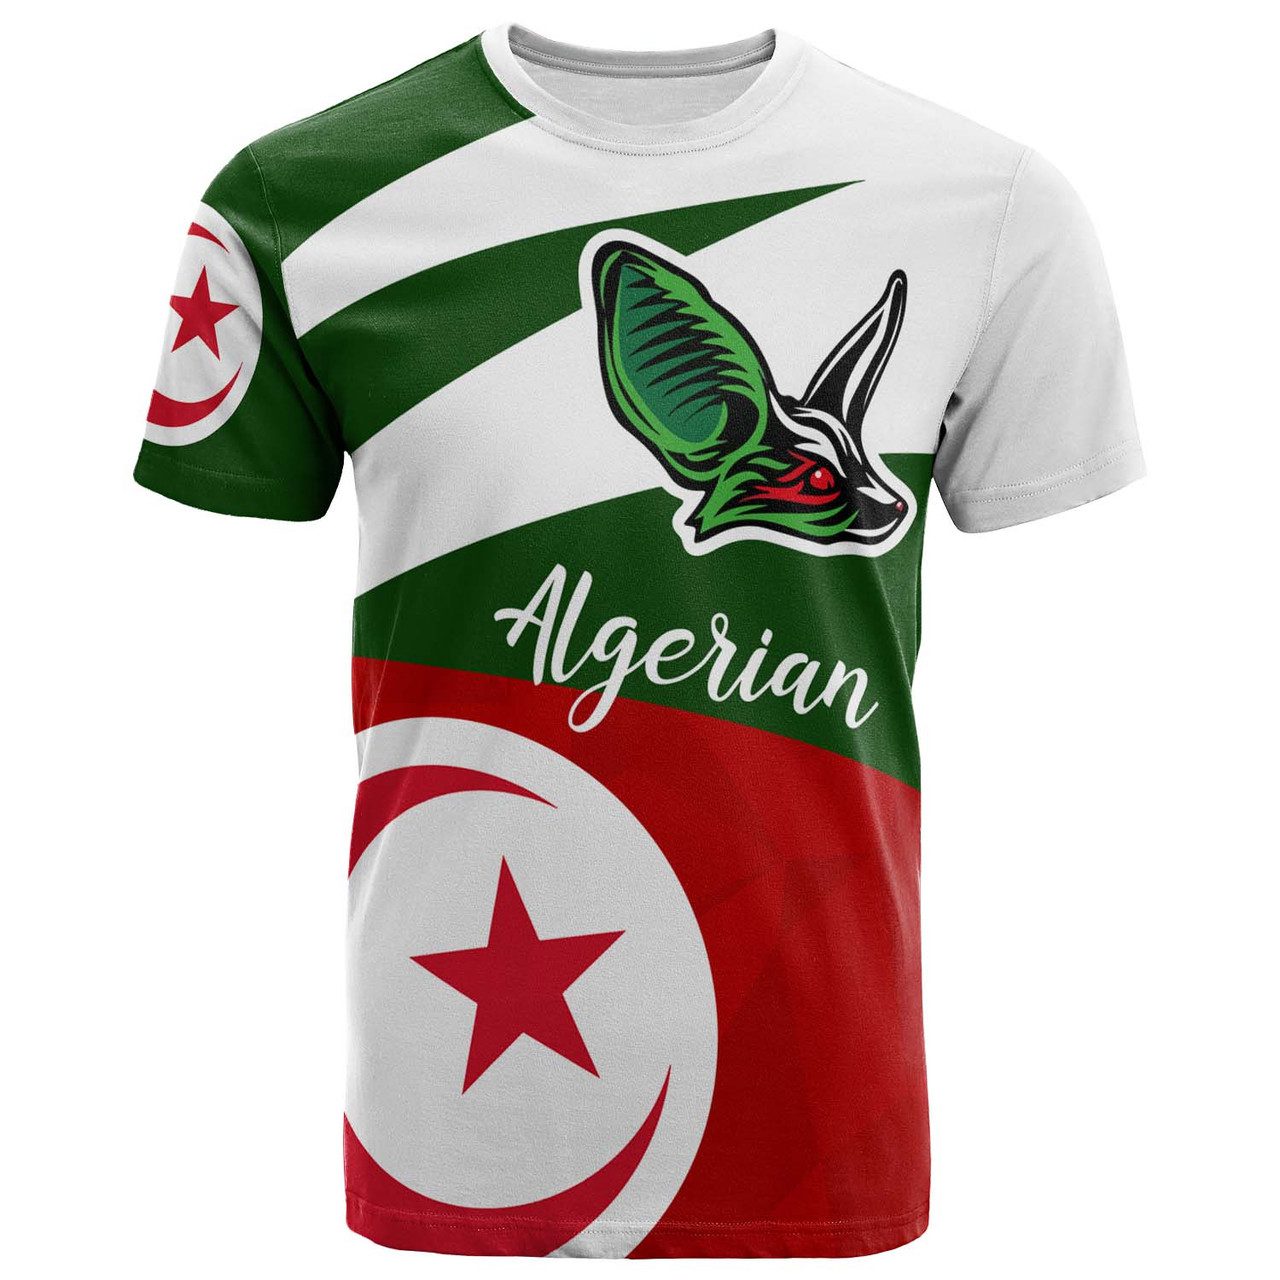 Algeria T-shirt – Algerian Independence Day with Fennec Fox T-shirt